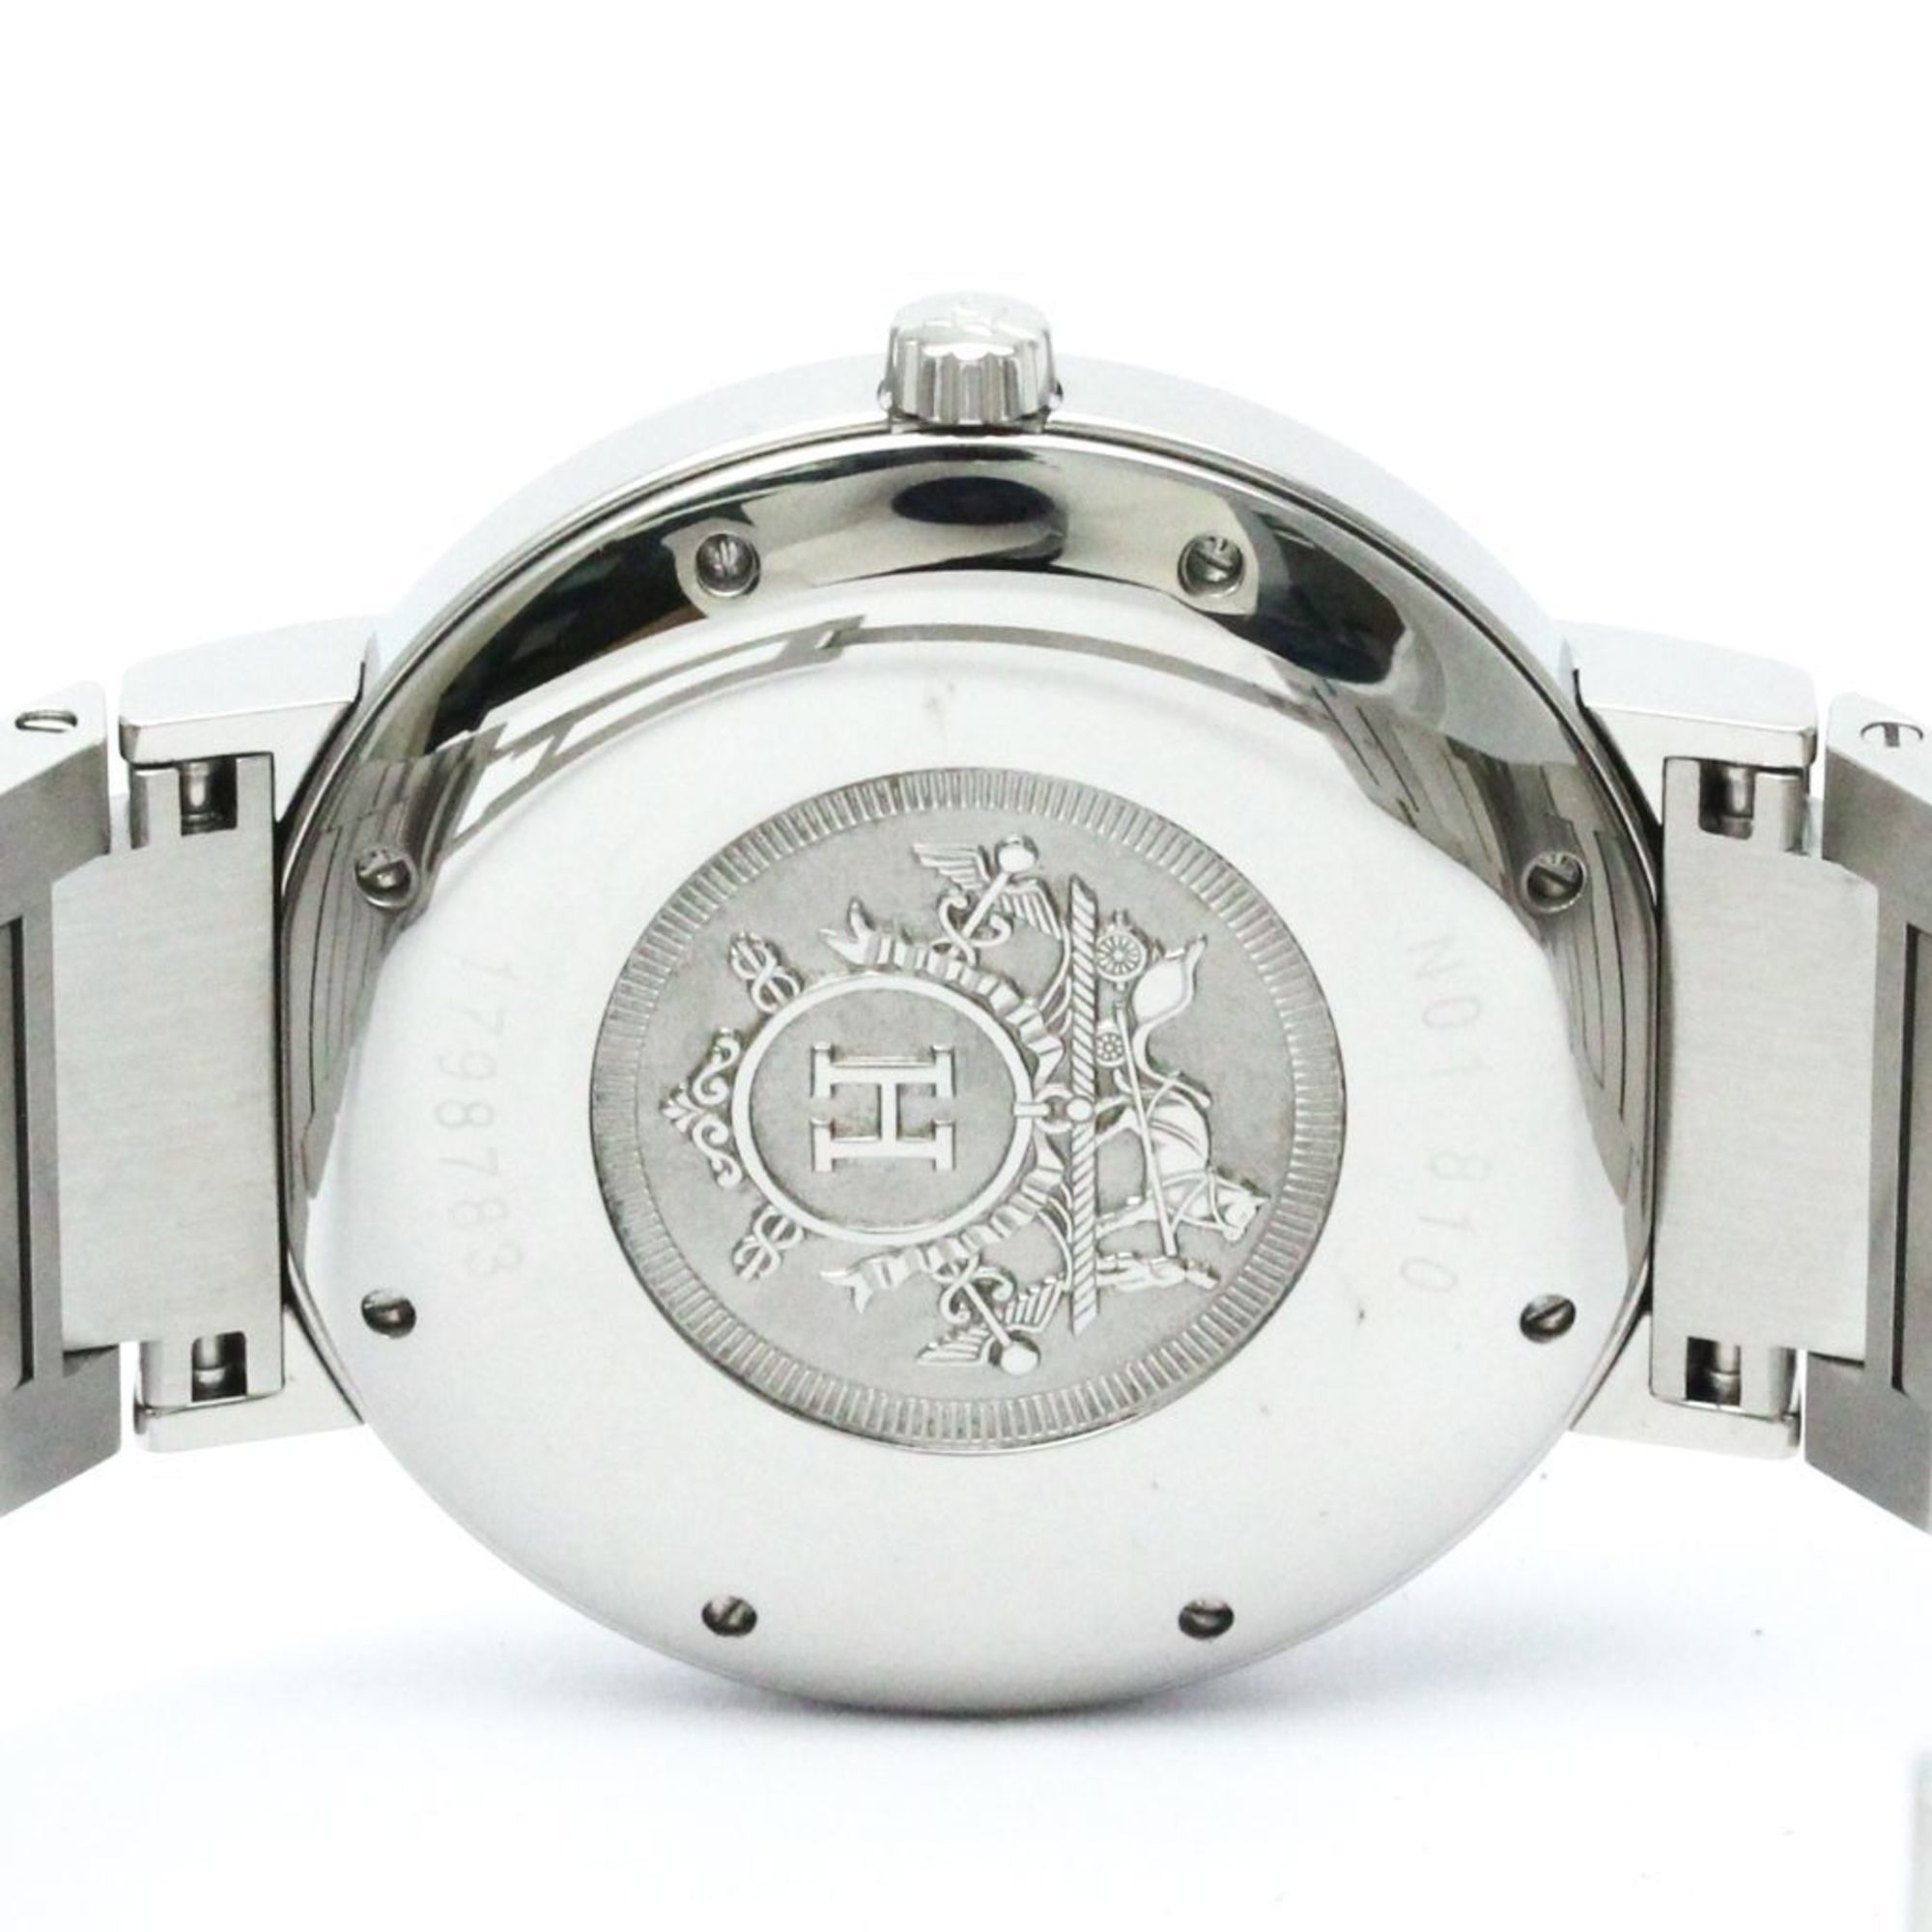 Polished HERMES Nomade Stainless Steel Auto Quartz Mens Watch NO1.810 BF564594